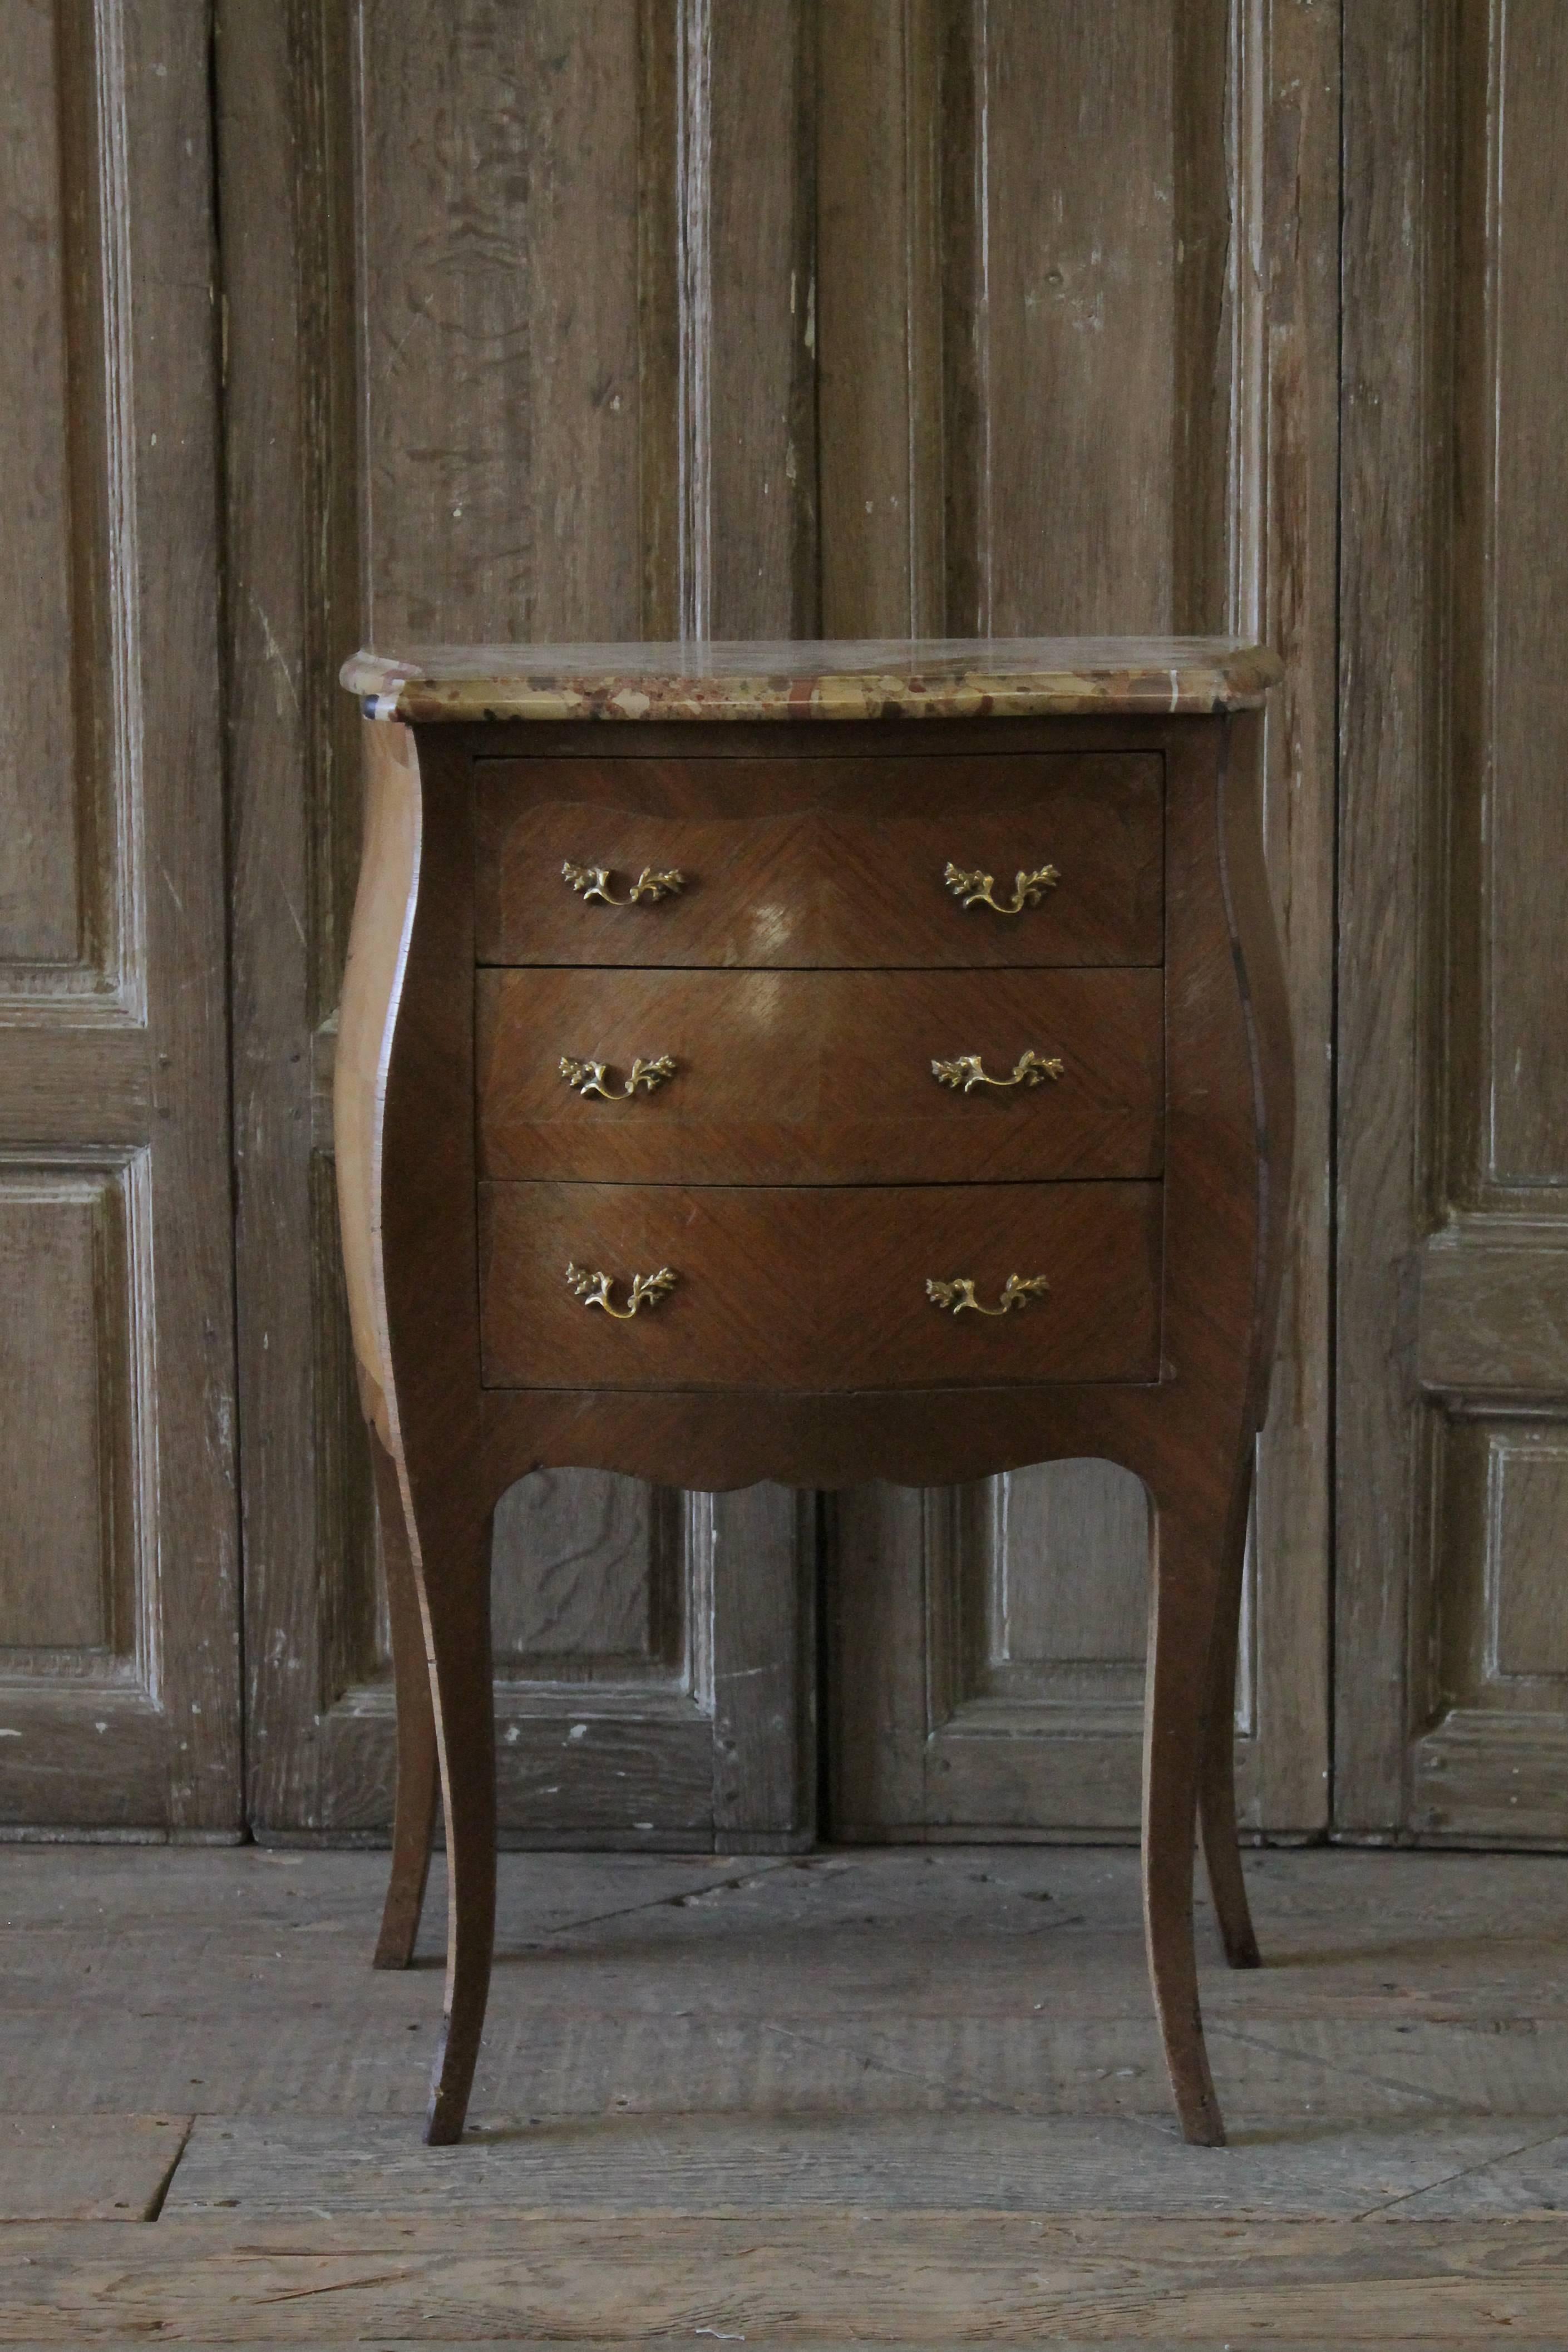 19th century Italian inlay commode side table with three drawers and marble top.
Drawers open and close with ease, made with a dovetail construction. Original gilt bronze French style pulls.
Original marble-top, in tan creams, brown and rust